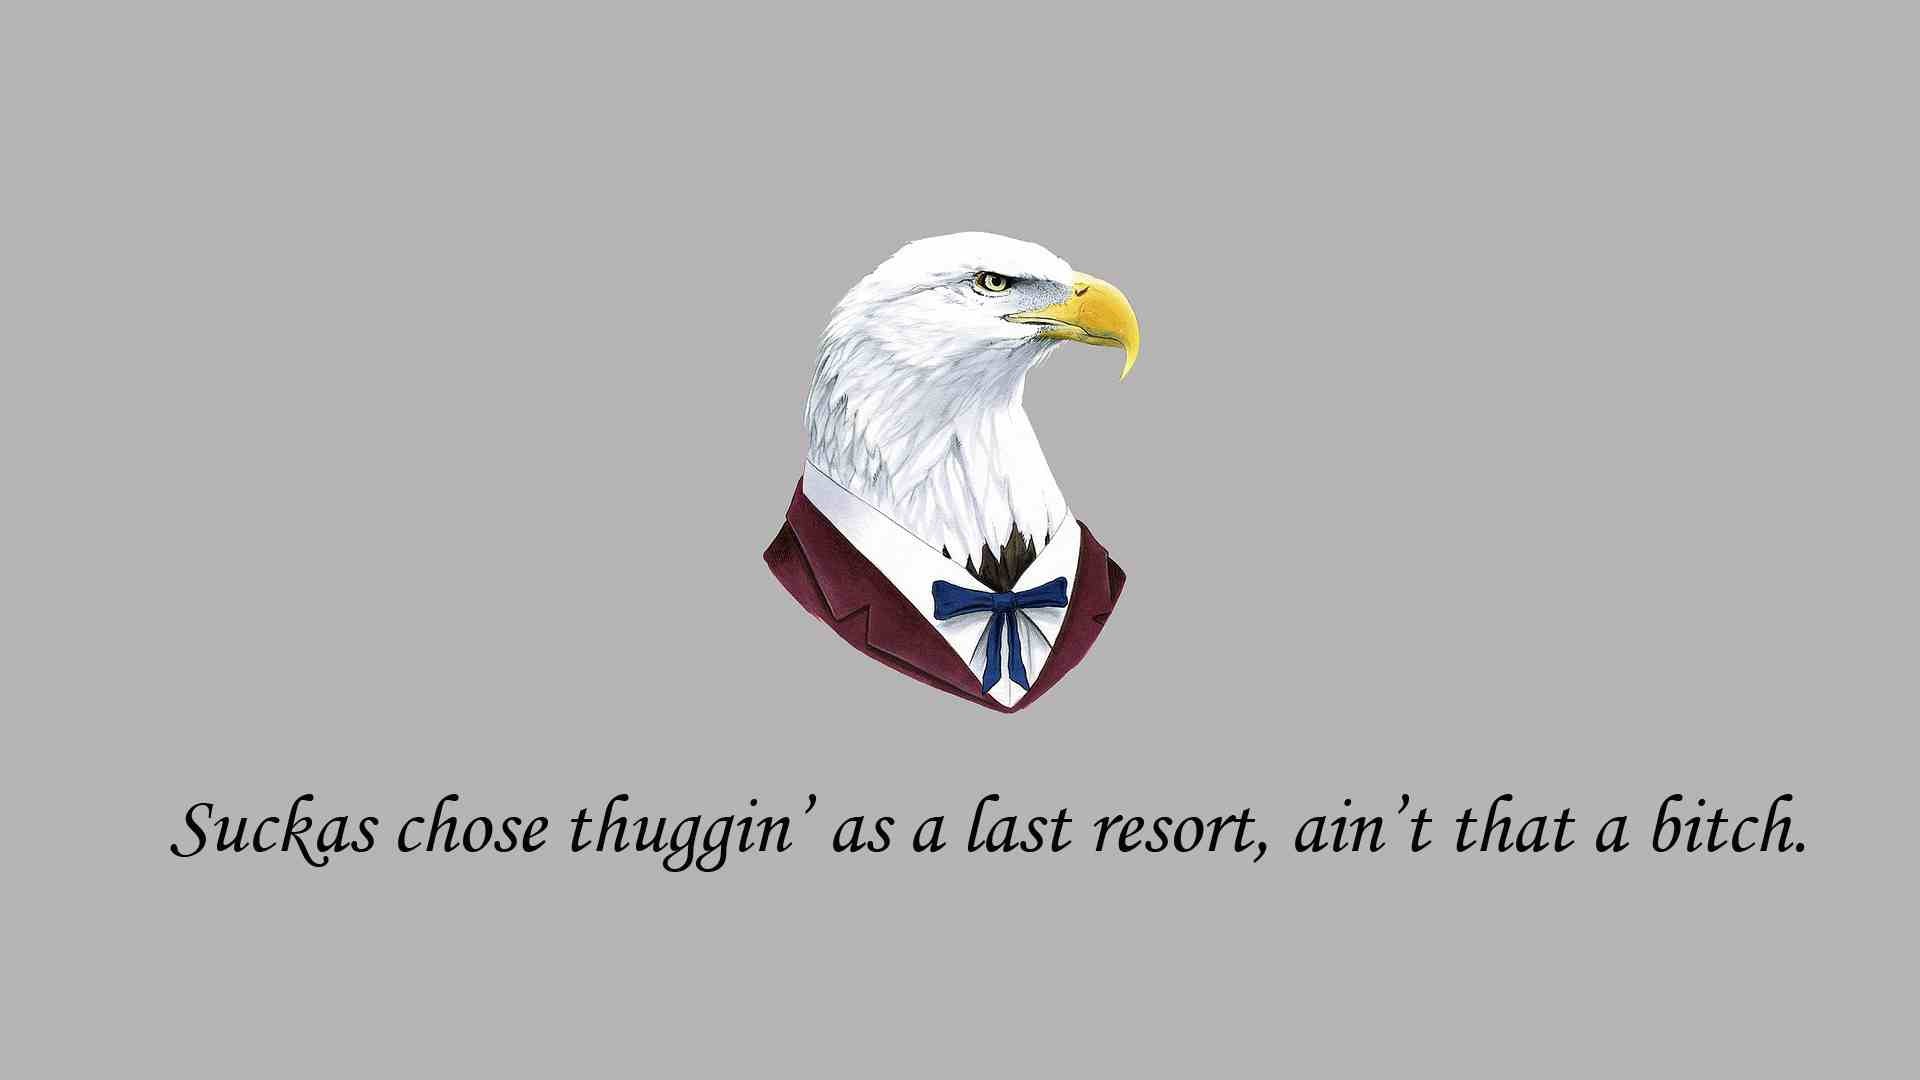 General 1920x1080 quote animals birds simple background eagle bitch typography gray background